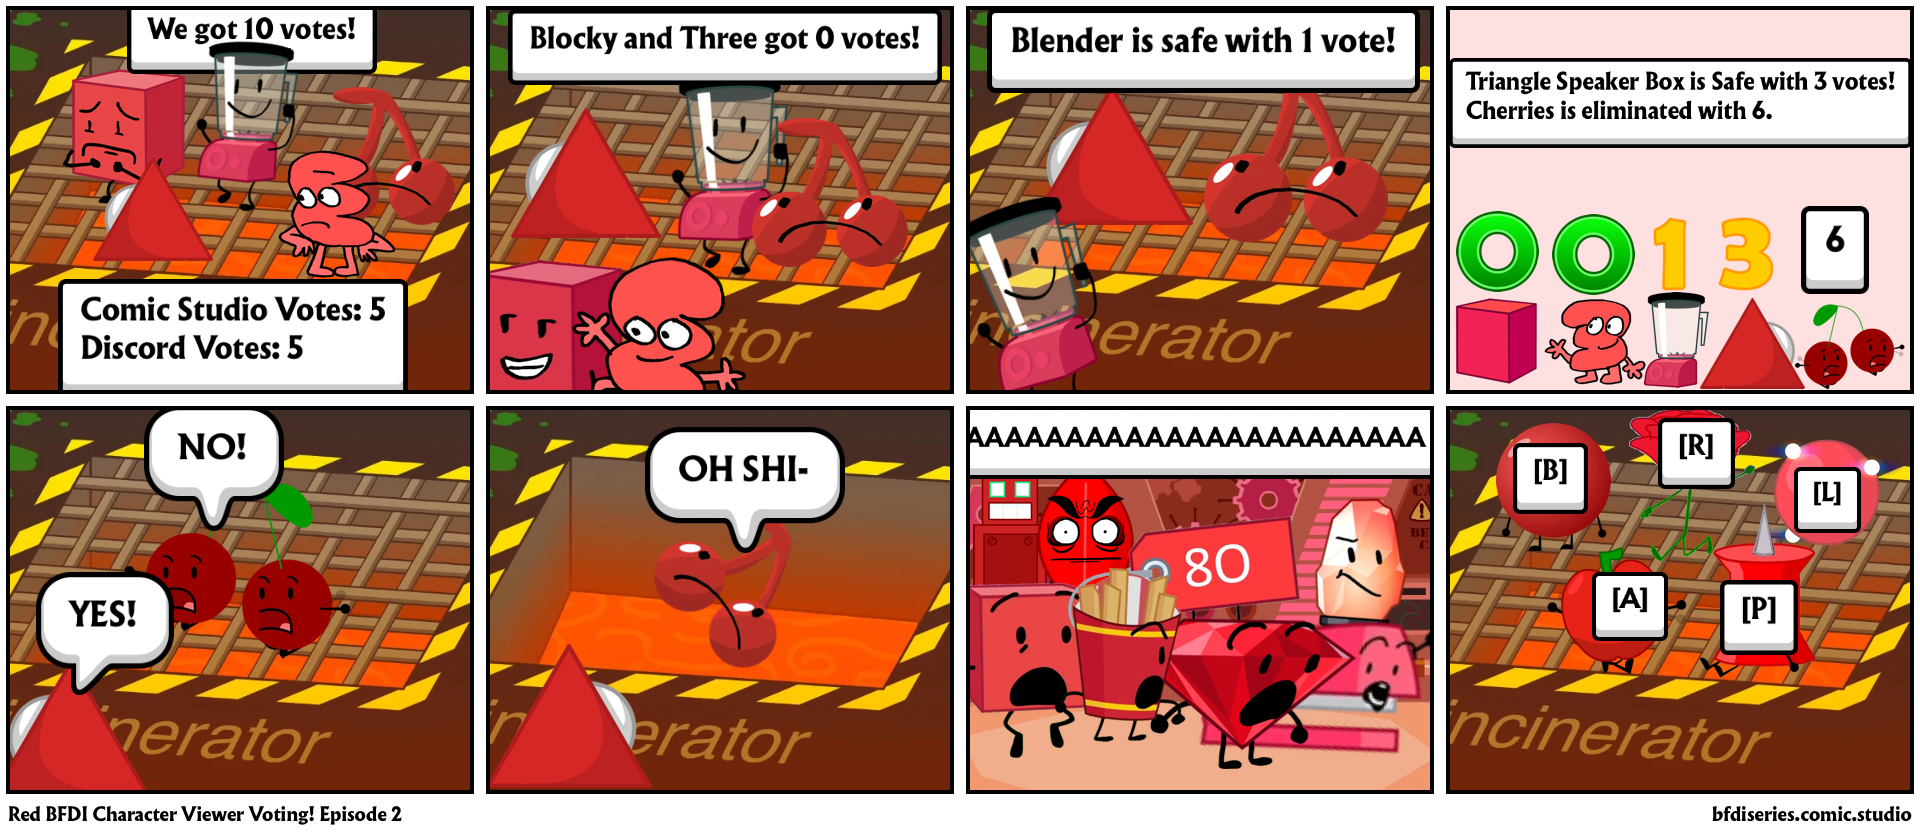 Red BFDI Character Viewer Voting! Episode 2